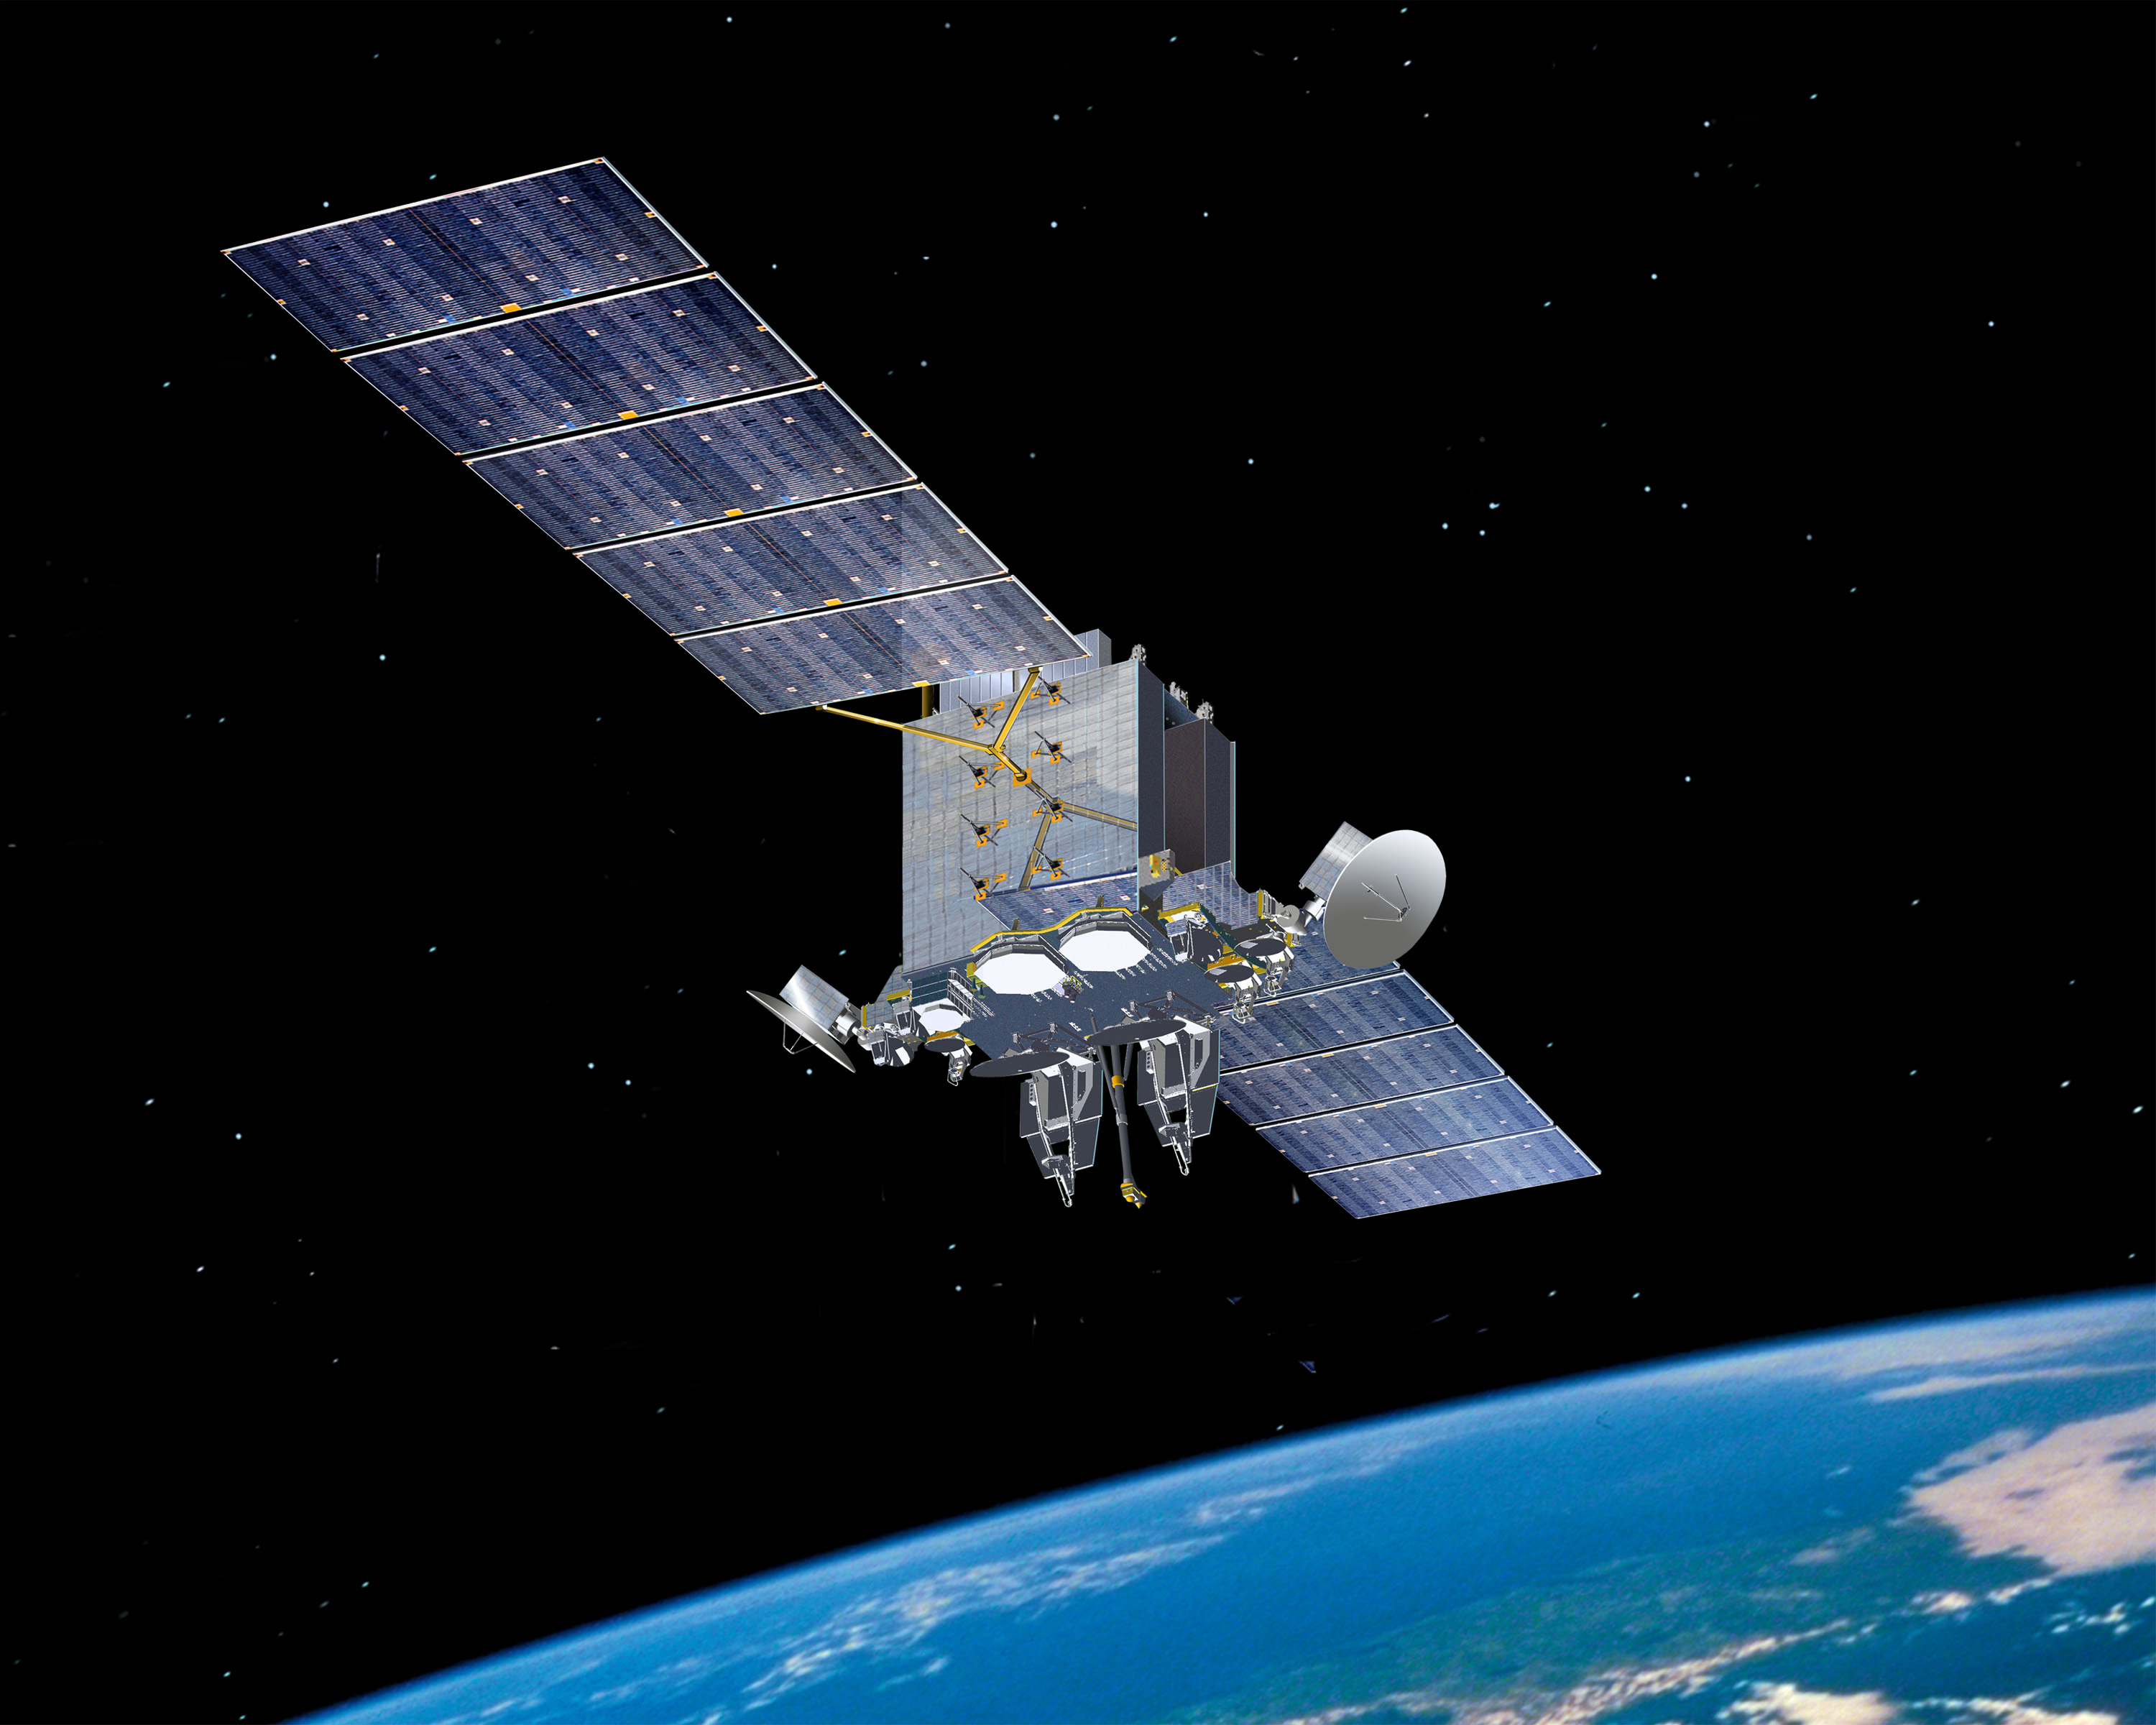 Photo of a military satellite